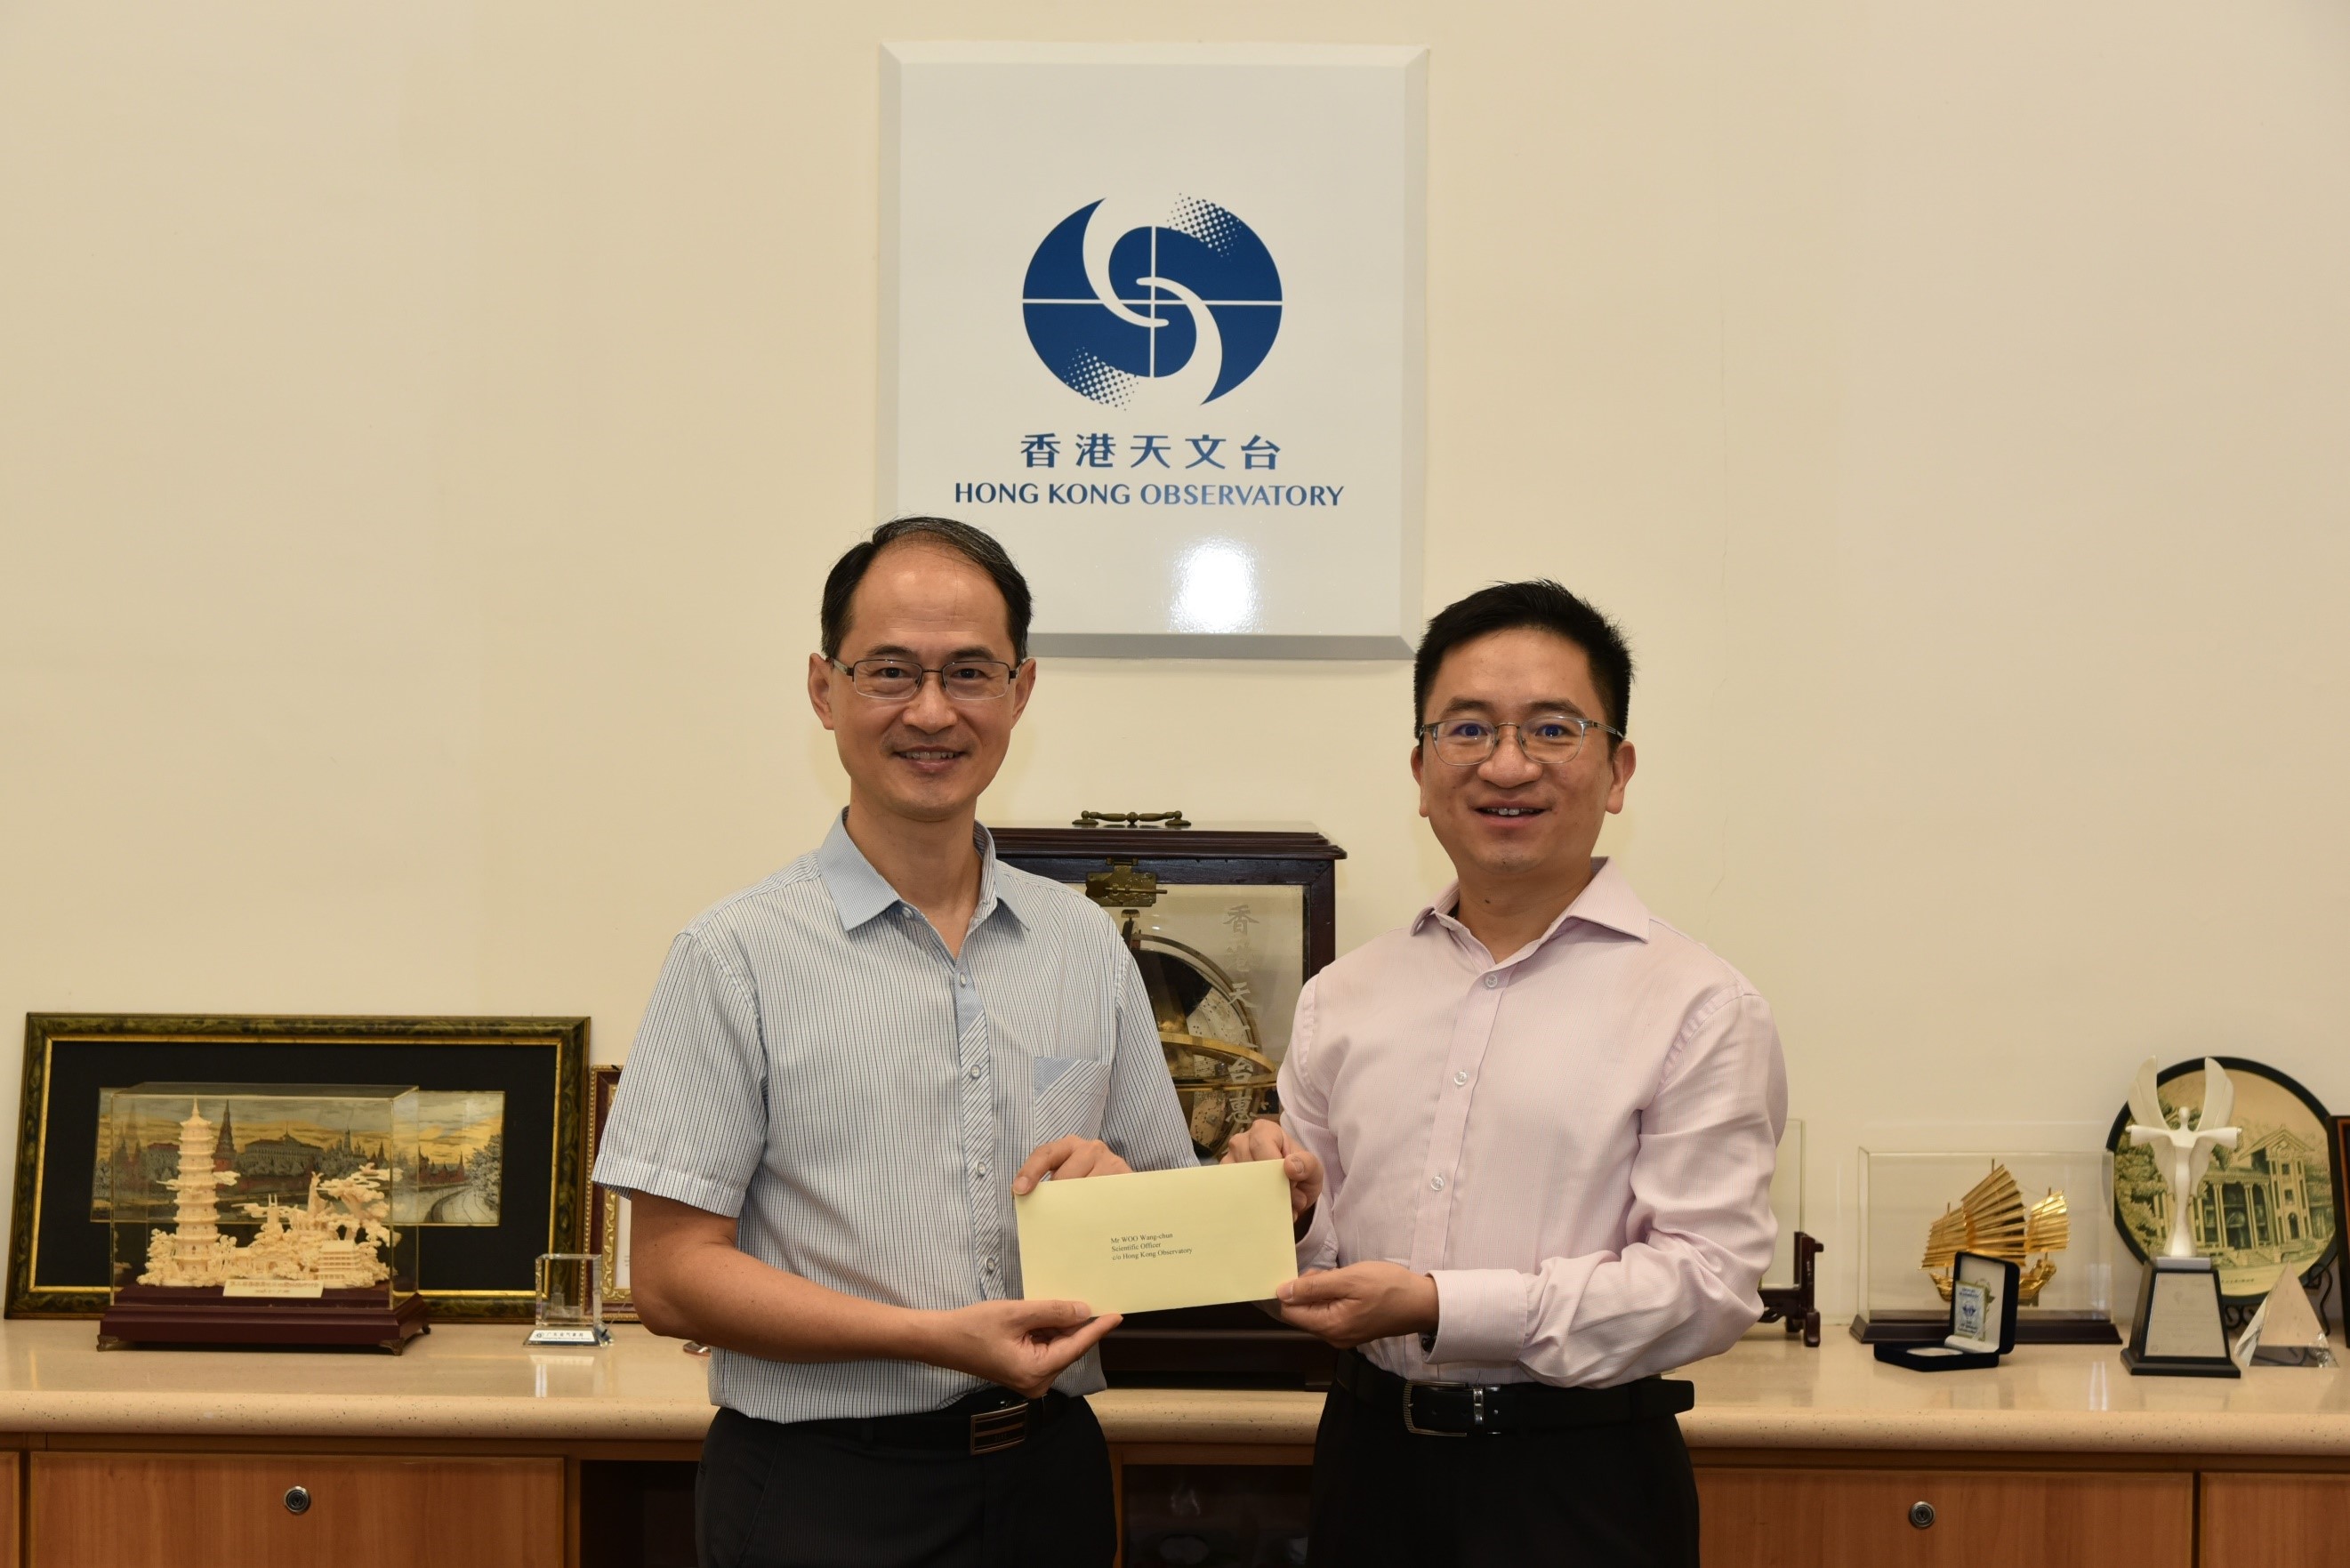 Mr Woo Wang-chun (right) was promoted to Senior Scientific Officer